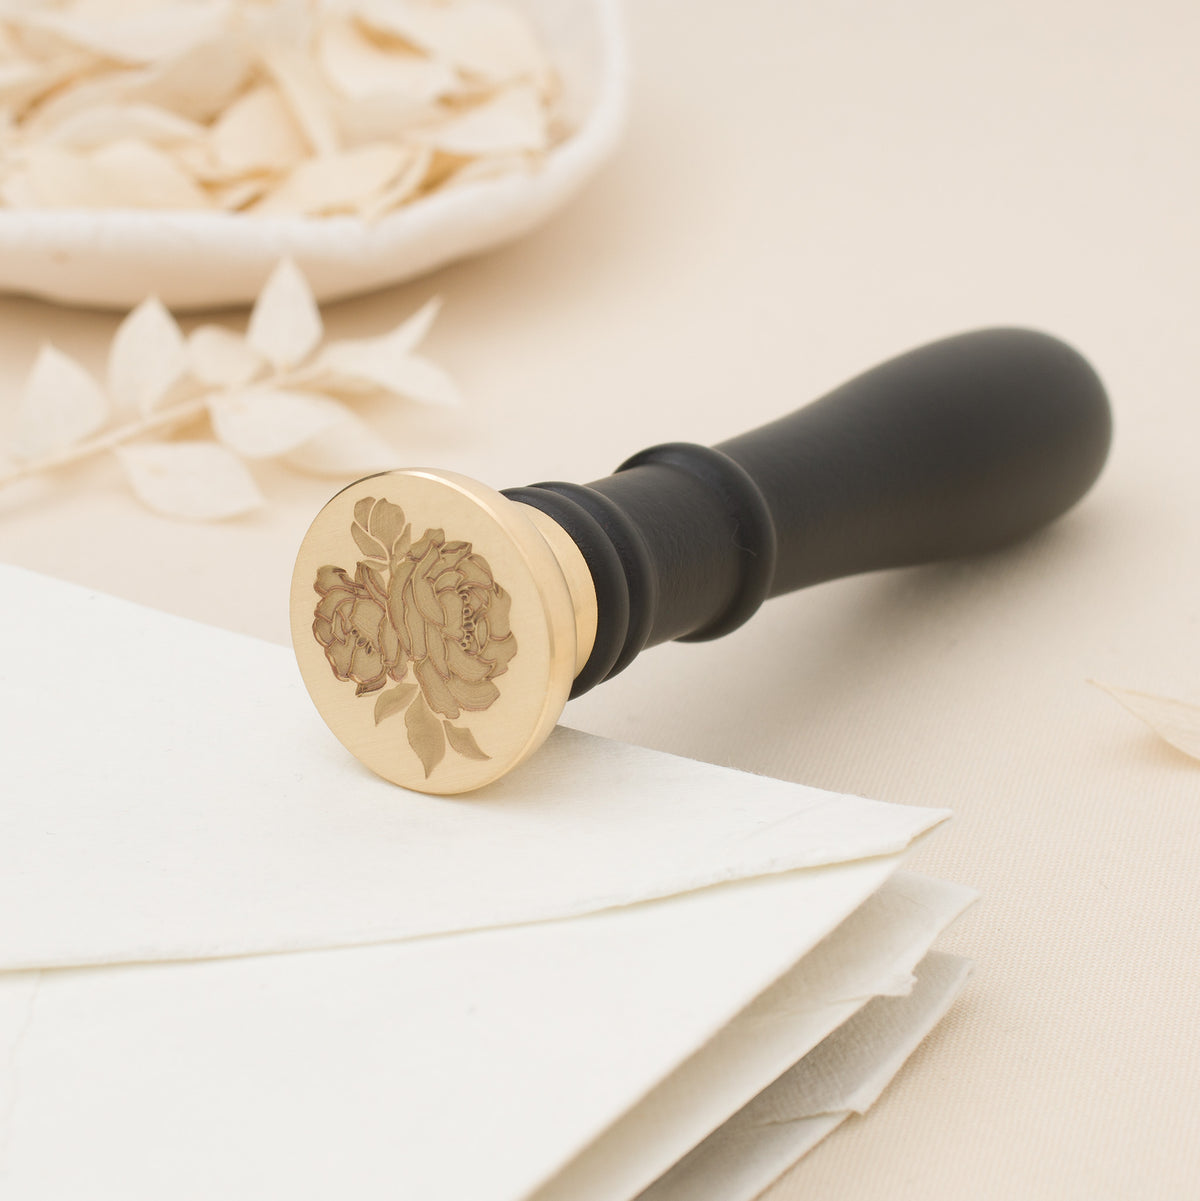 Personalised wax seal stamp with two sealing wax sticks with Pineider wood  case